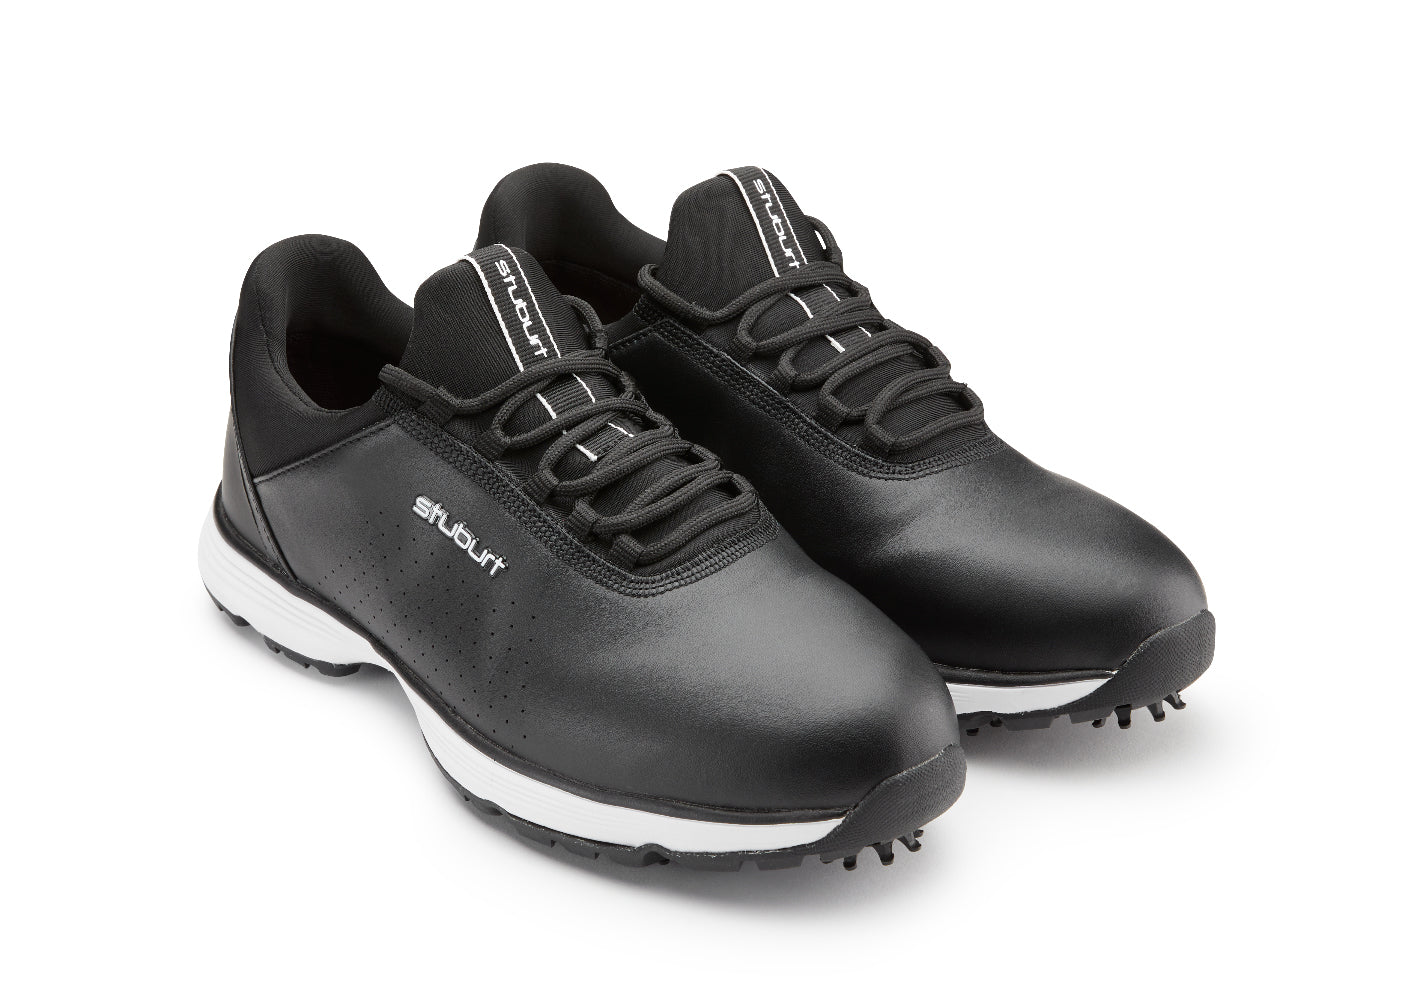 Evolve Classic Spiked Golf Shoe